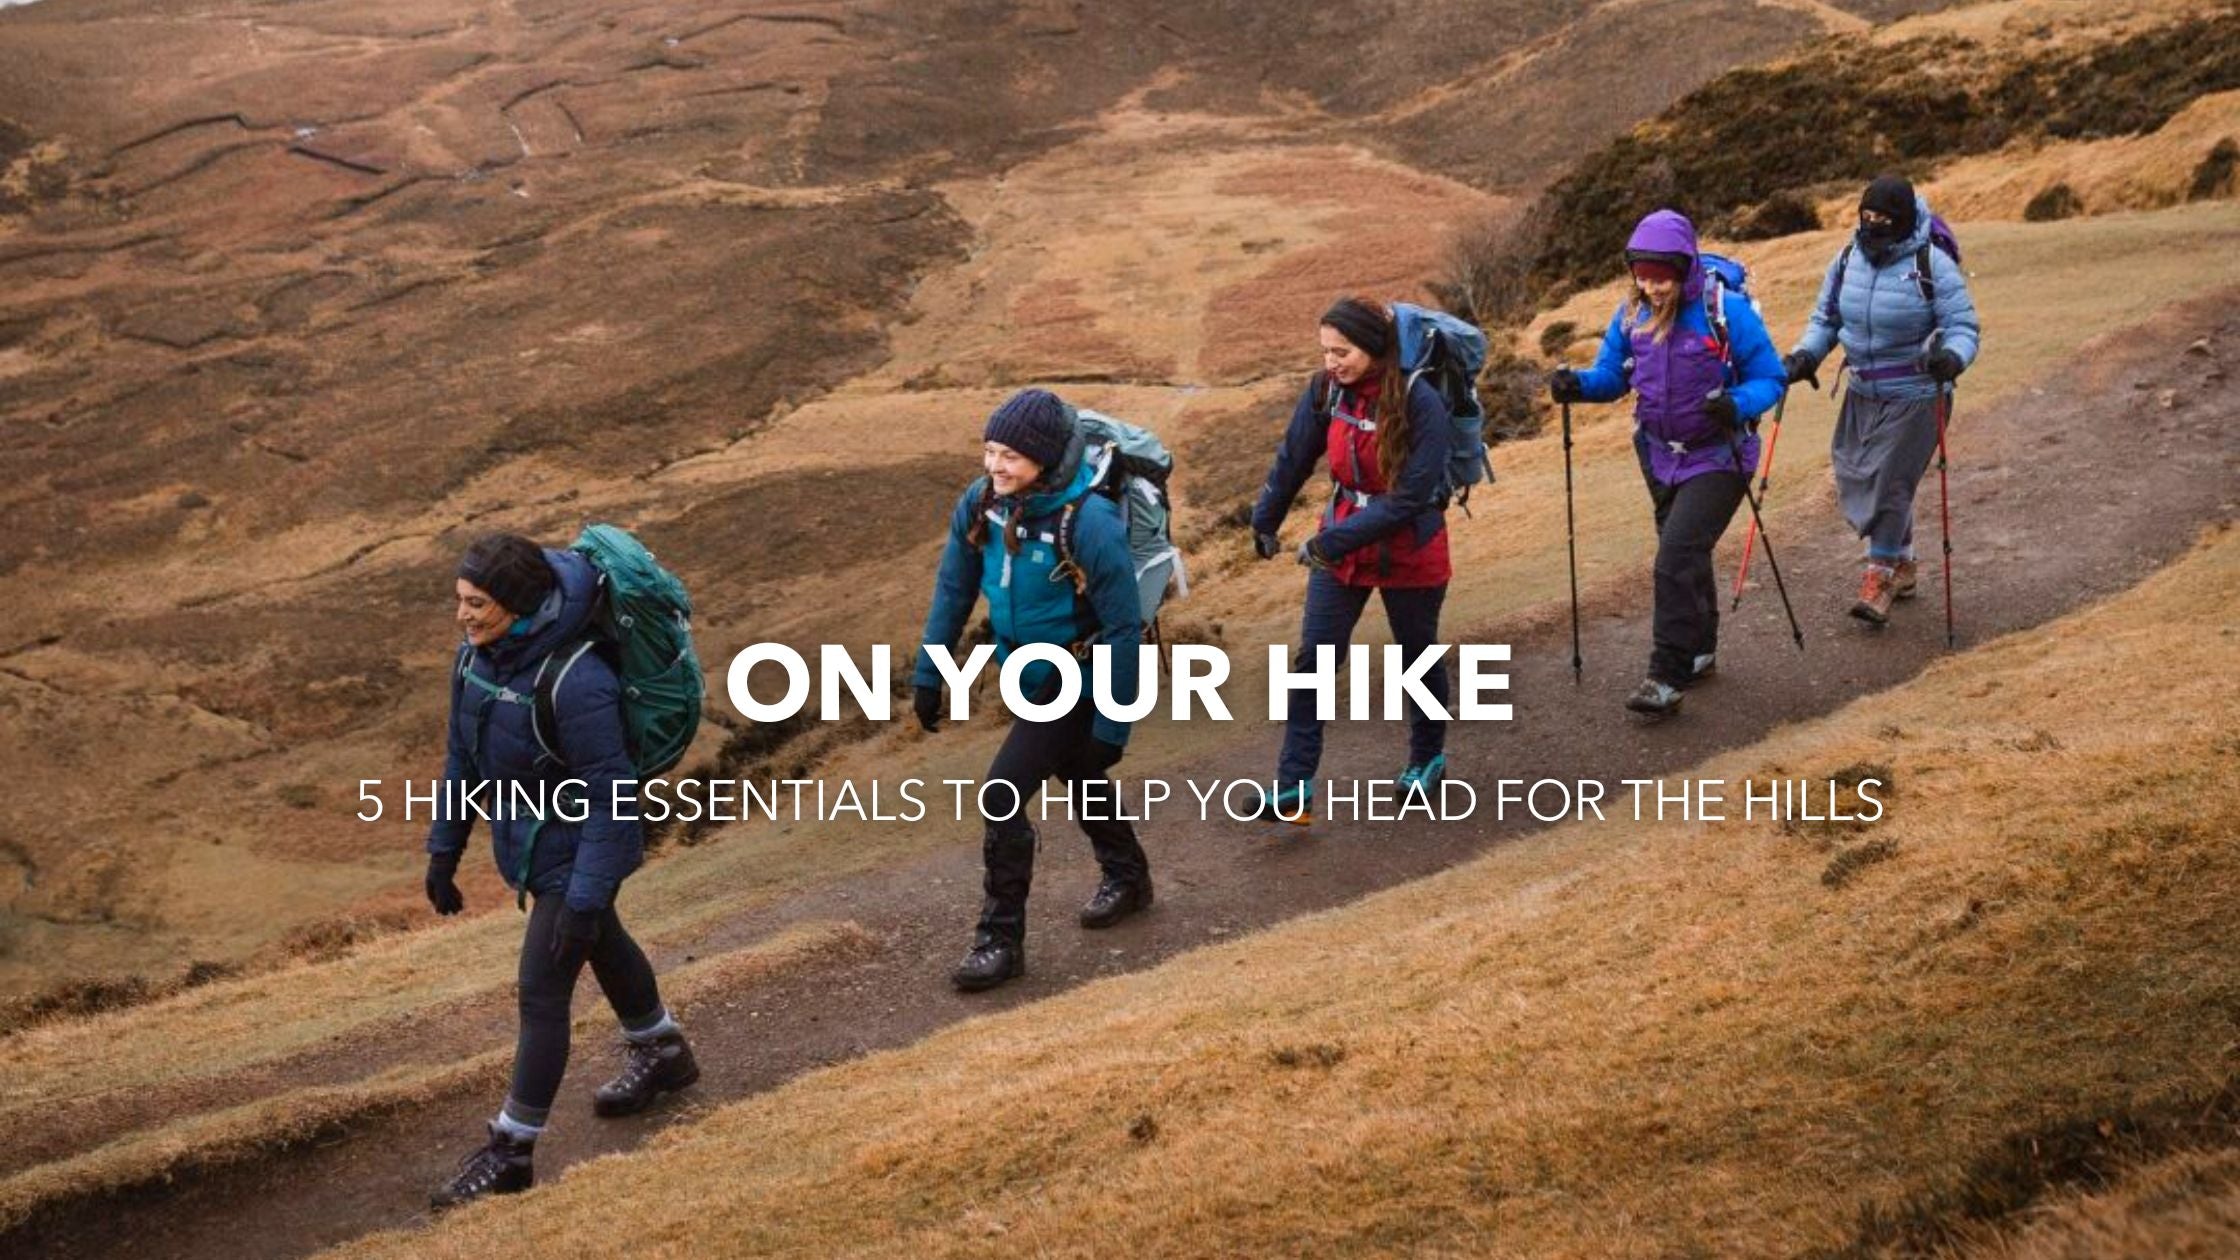 Essential hiking gear from Portwest - The Outdoor Shop Ireland